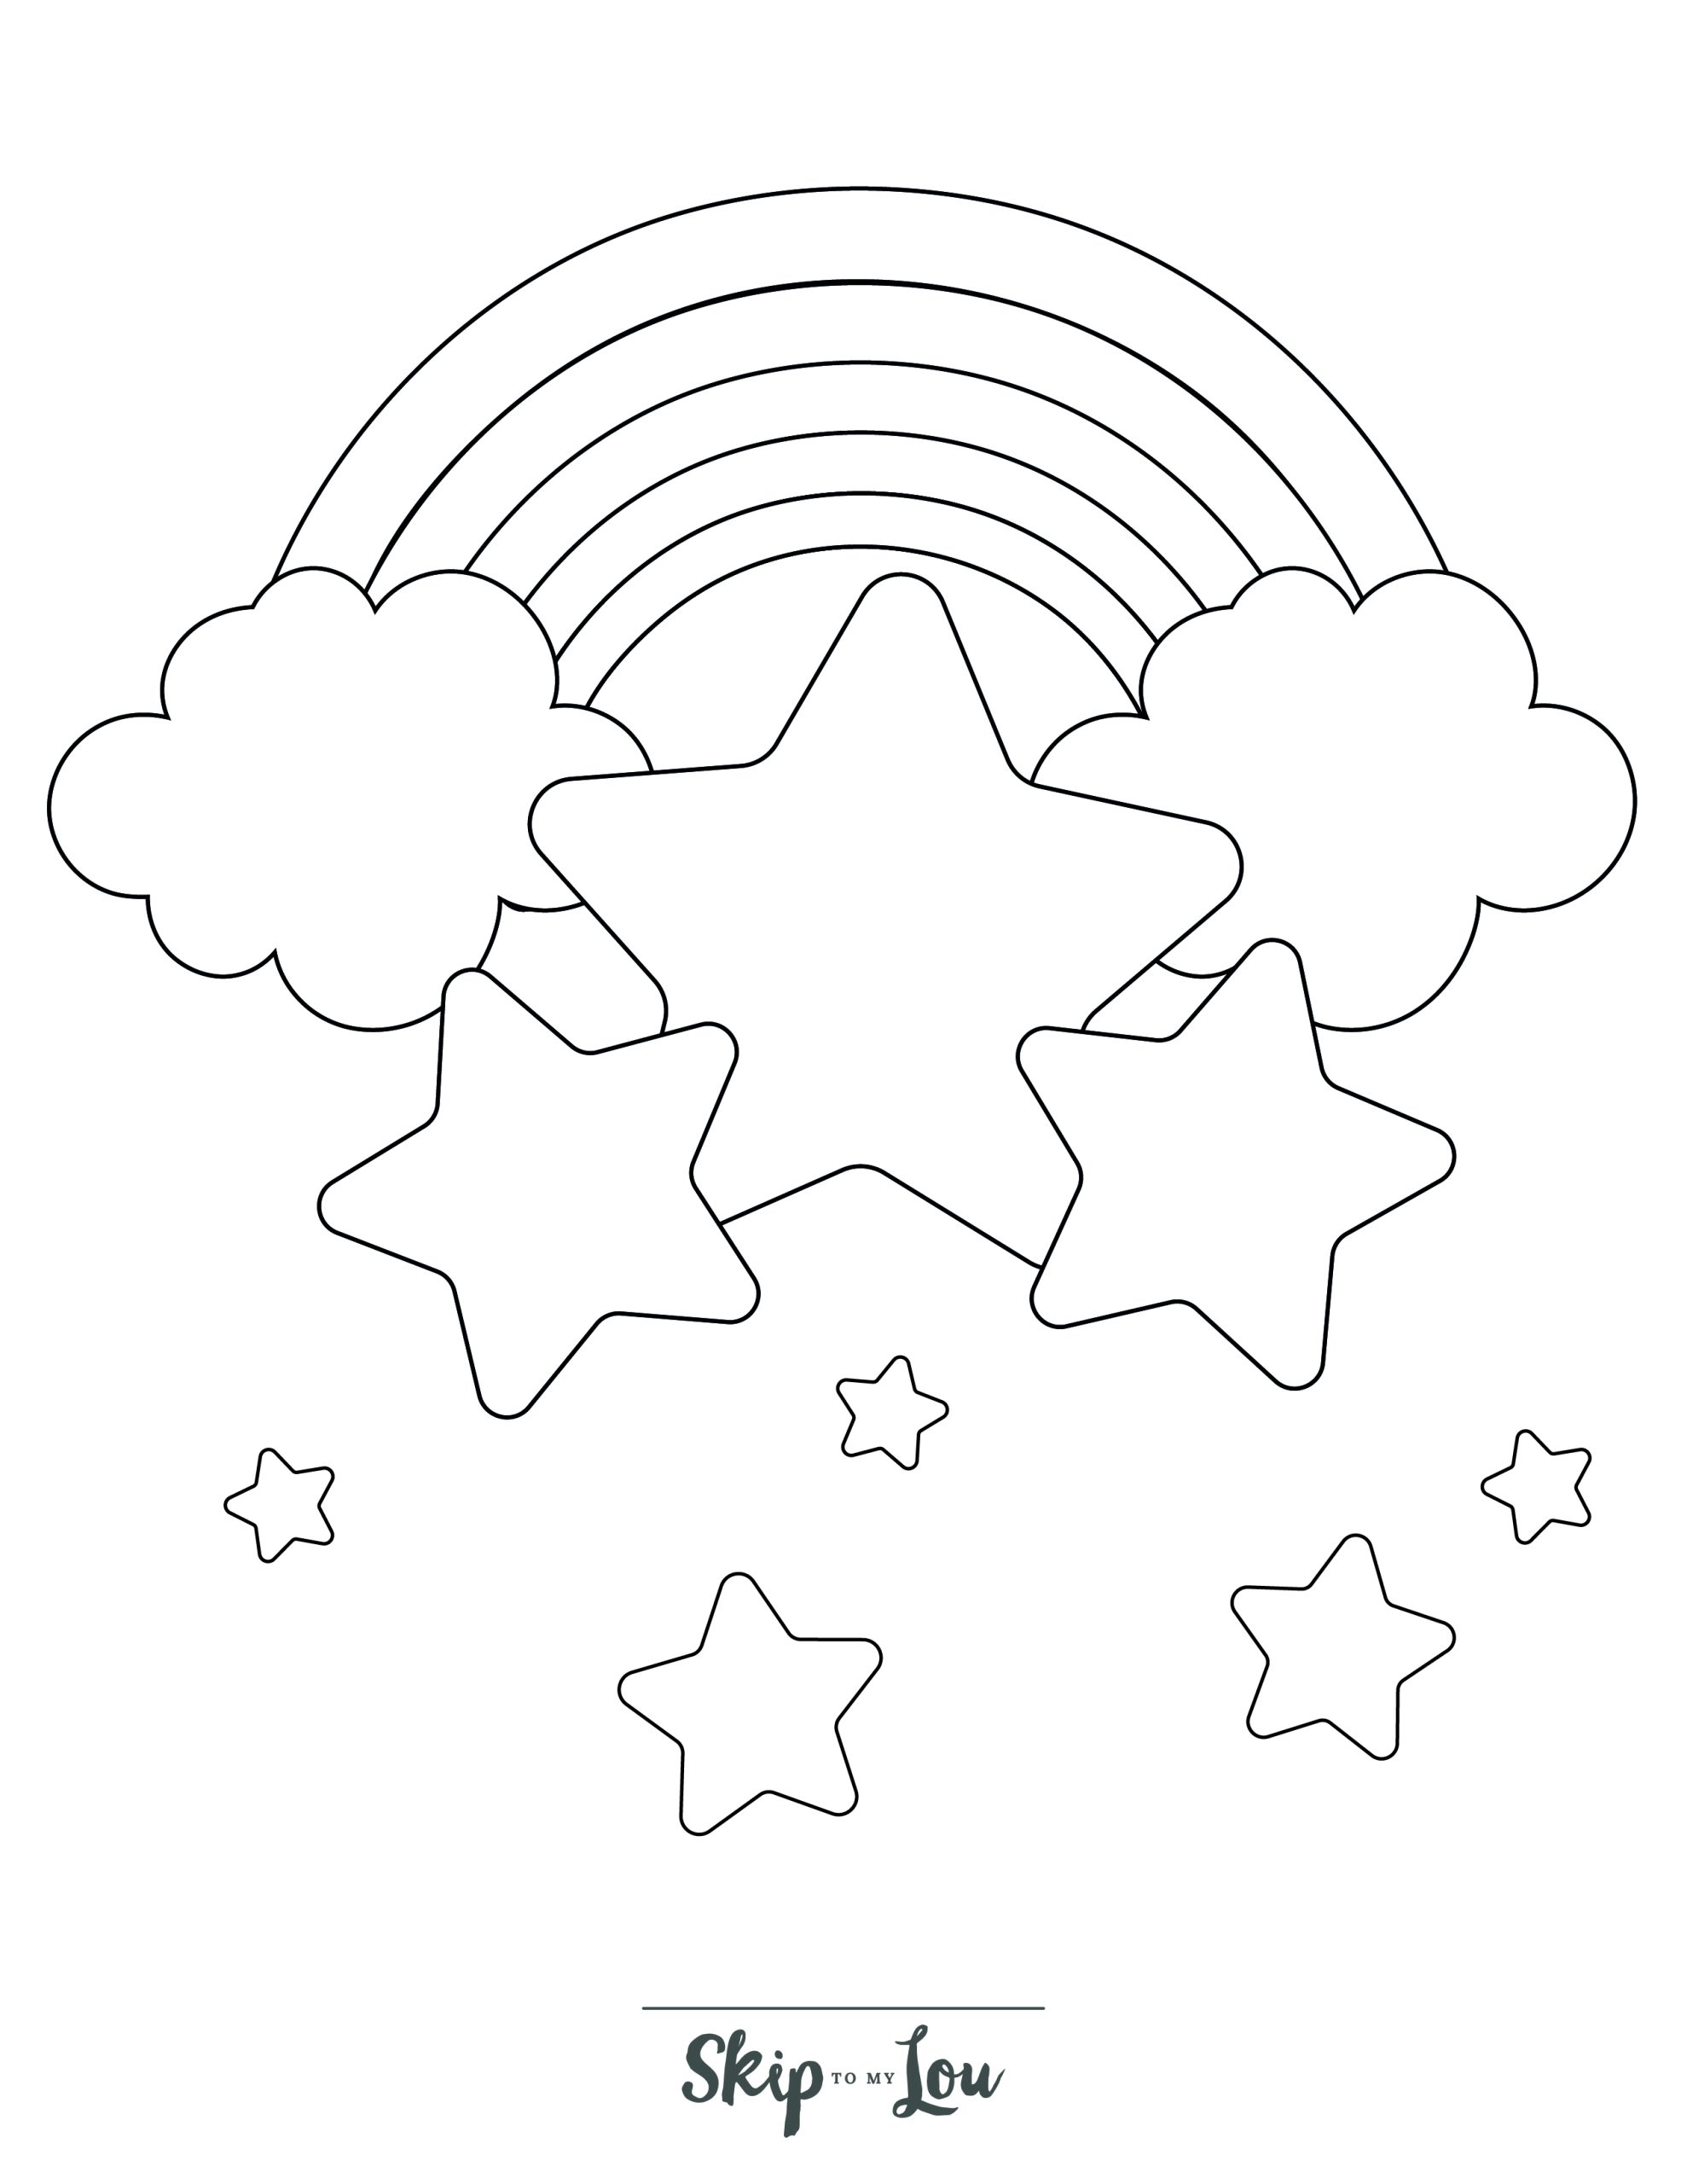 Star Coloring Page 8 - Line drawing of a stars with rainbow and clouds in background